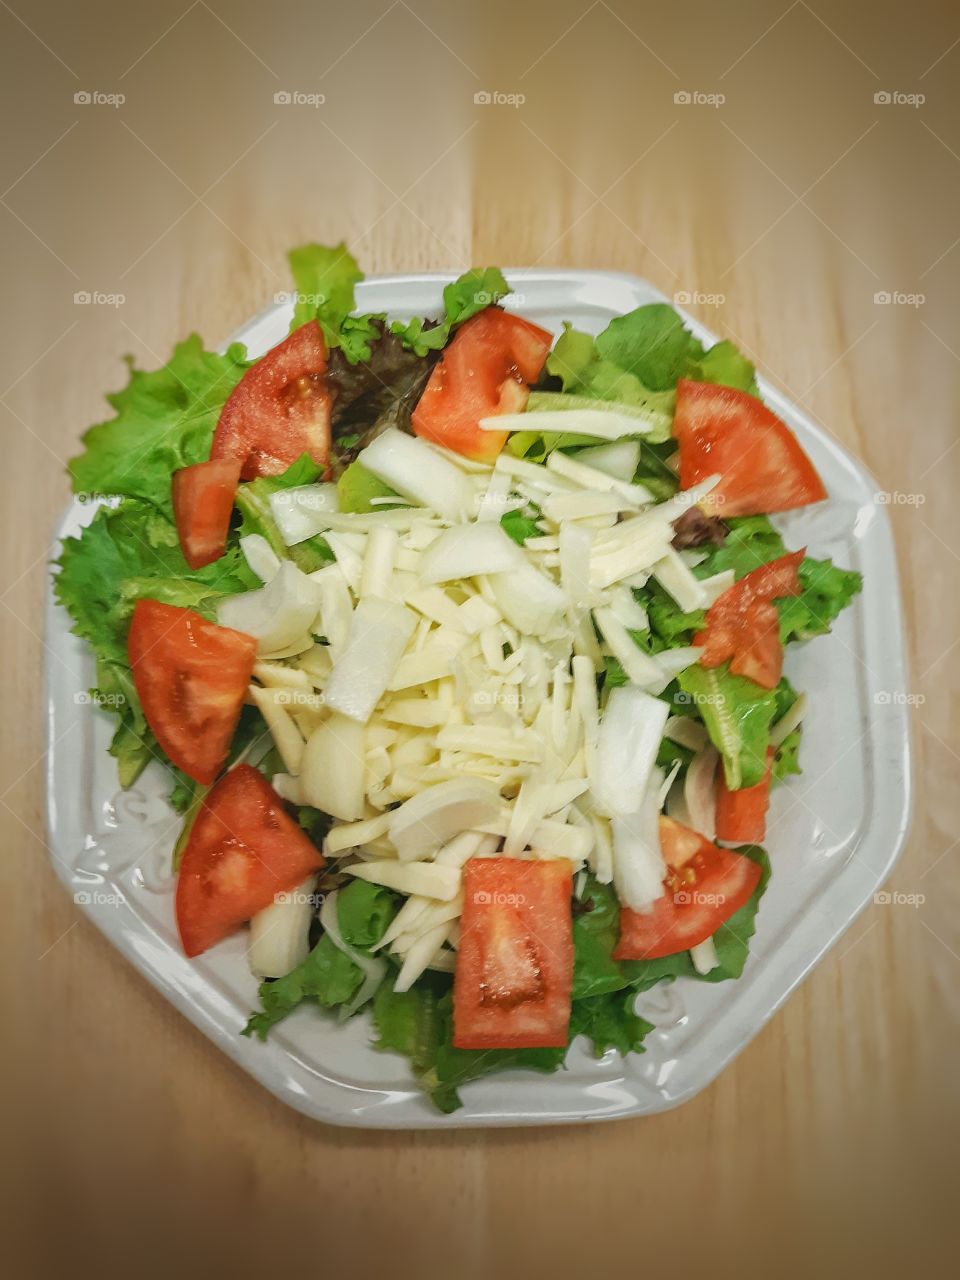 Lunch Time Salad